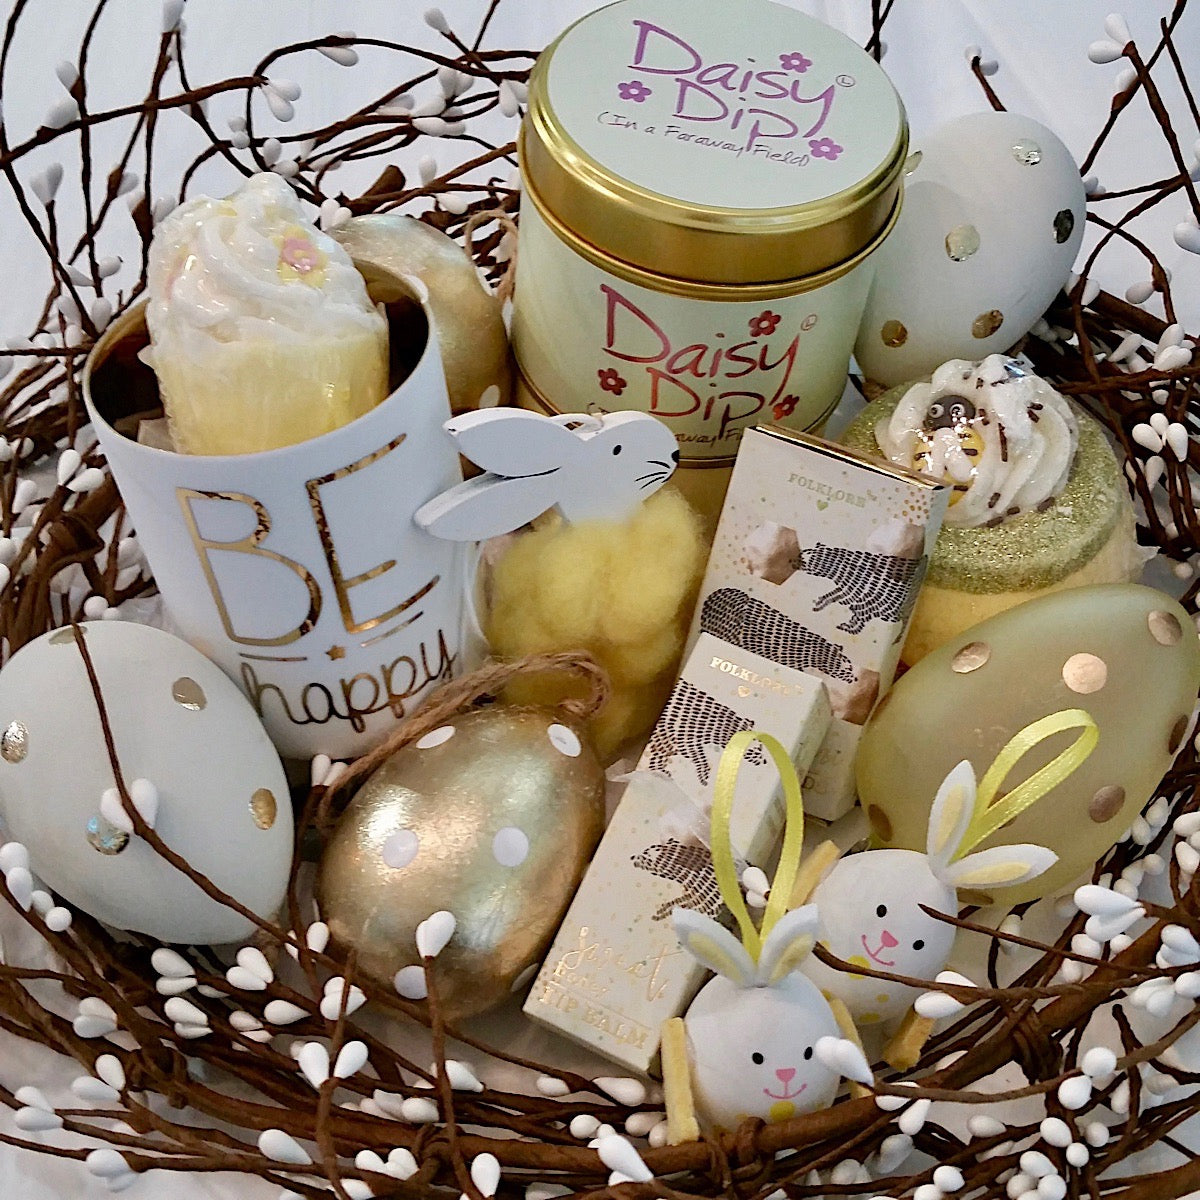 Enter Our Easter Competition!